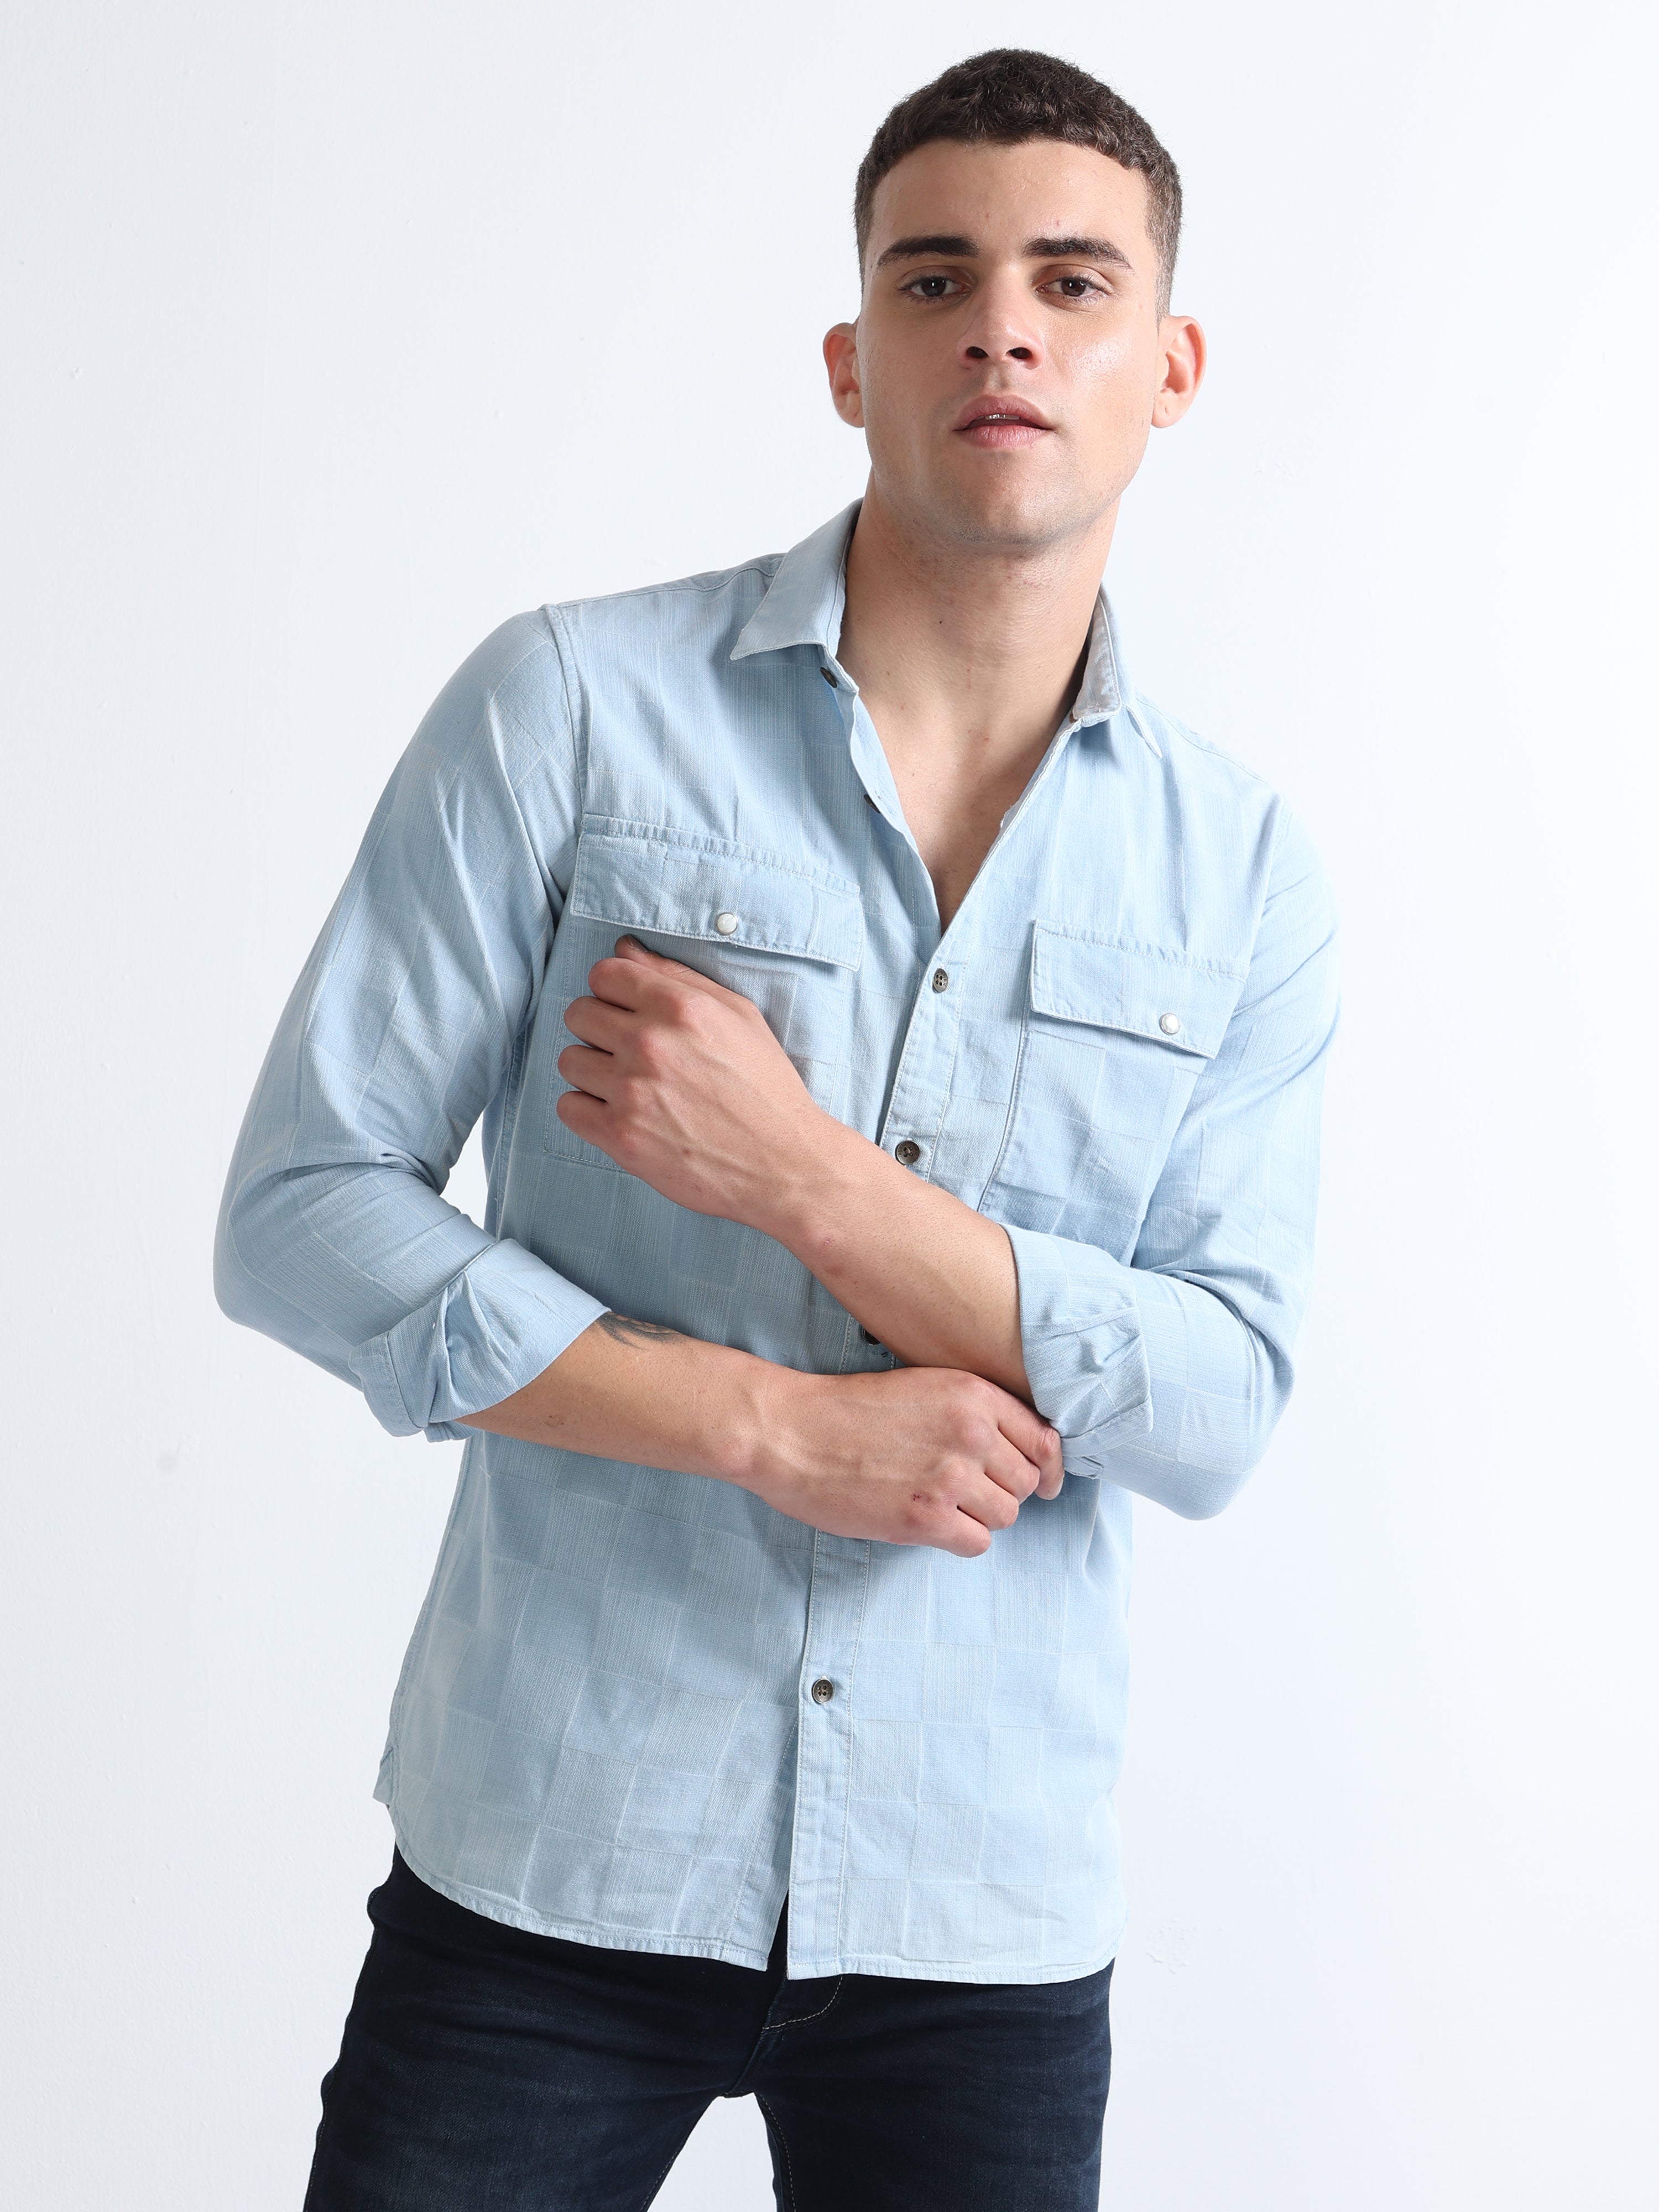 Buy Blue Shirts for Men by Southbay Online | Ajio.com